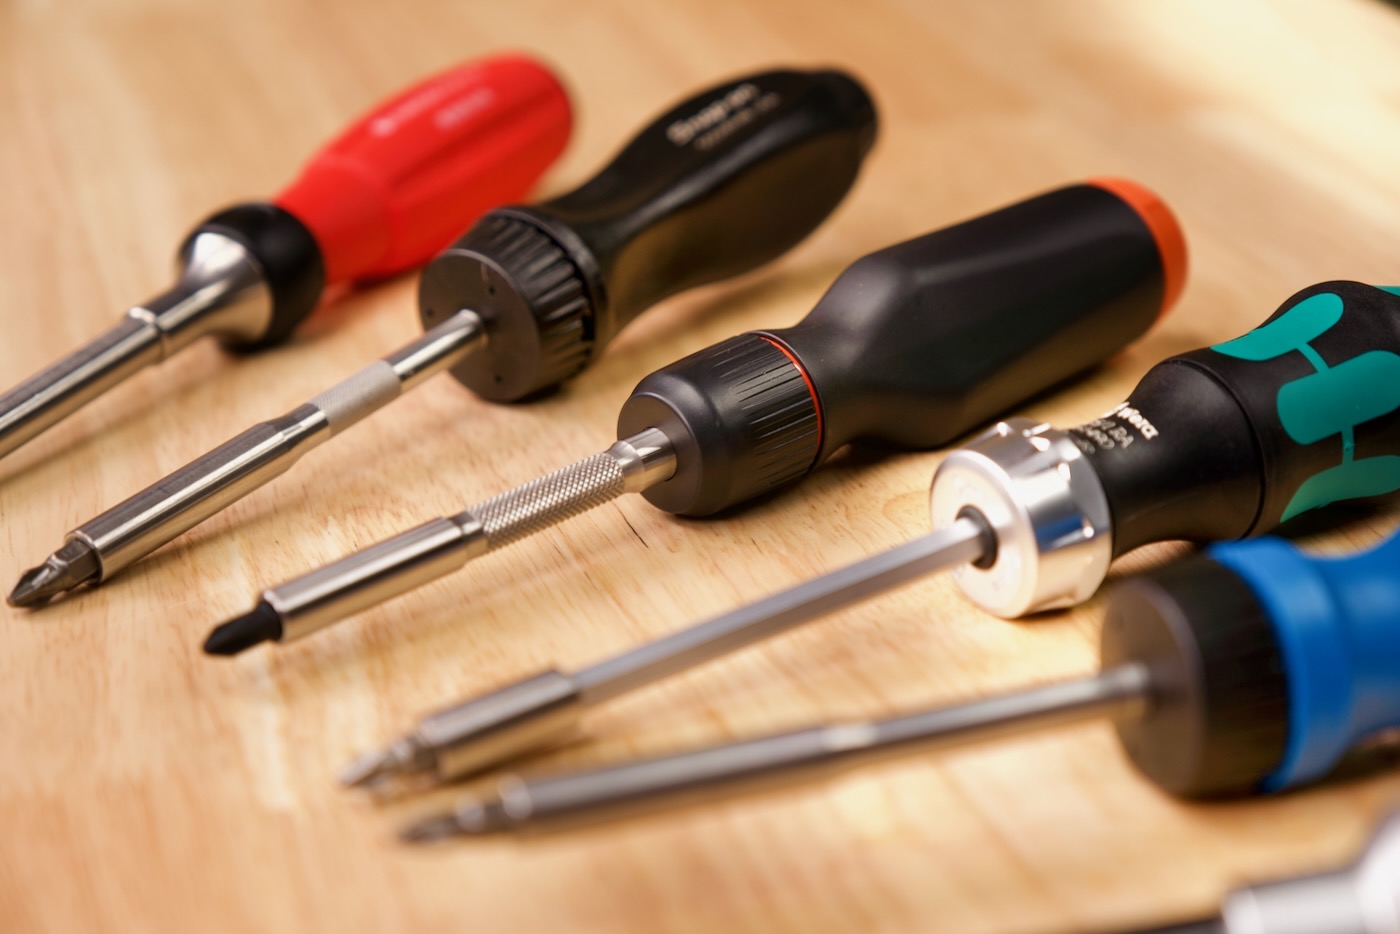 What European Hand Tools Are Comparable To Snap On